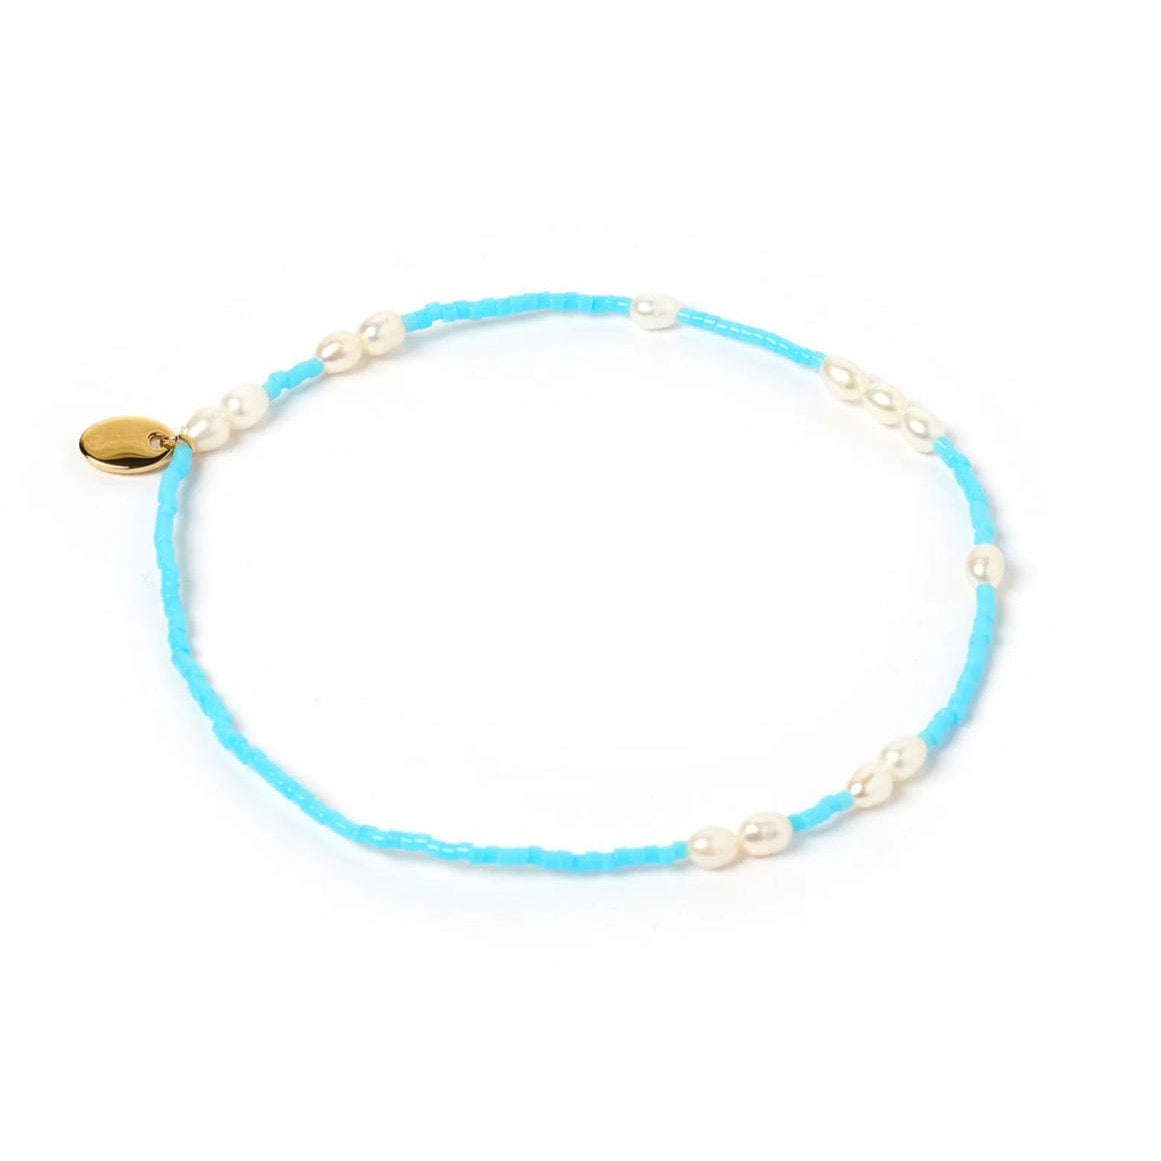 Poppy Pearl + Glass Bead Anklet Turquoise For Her by Arms of Eve